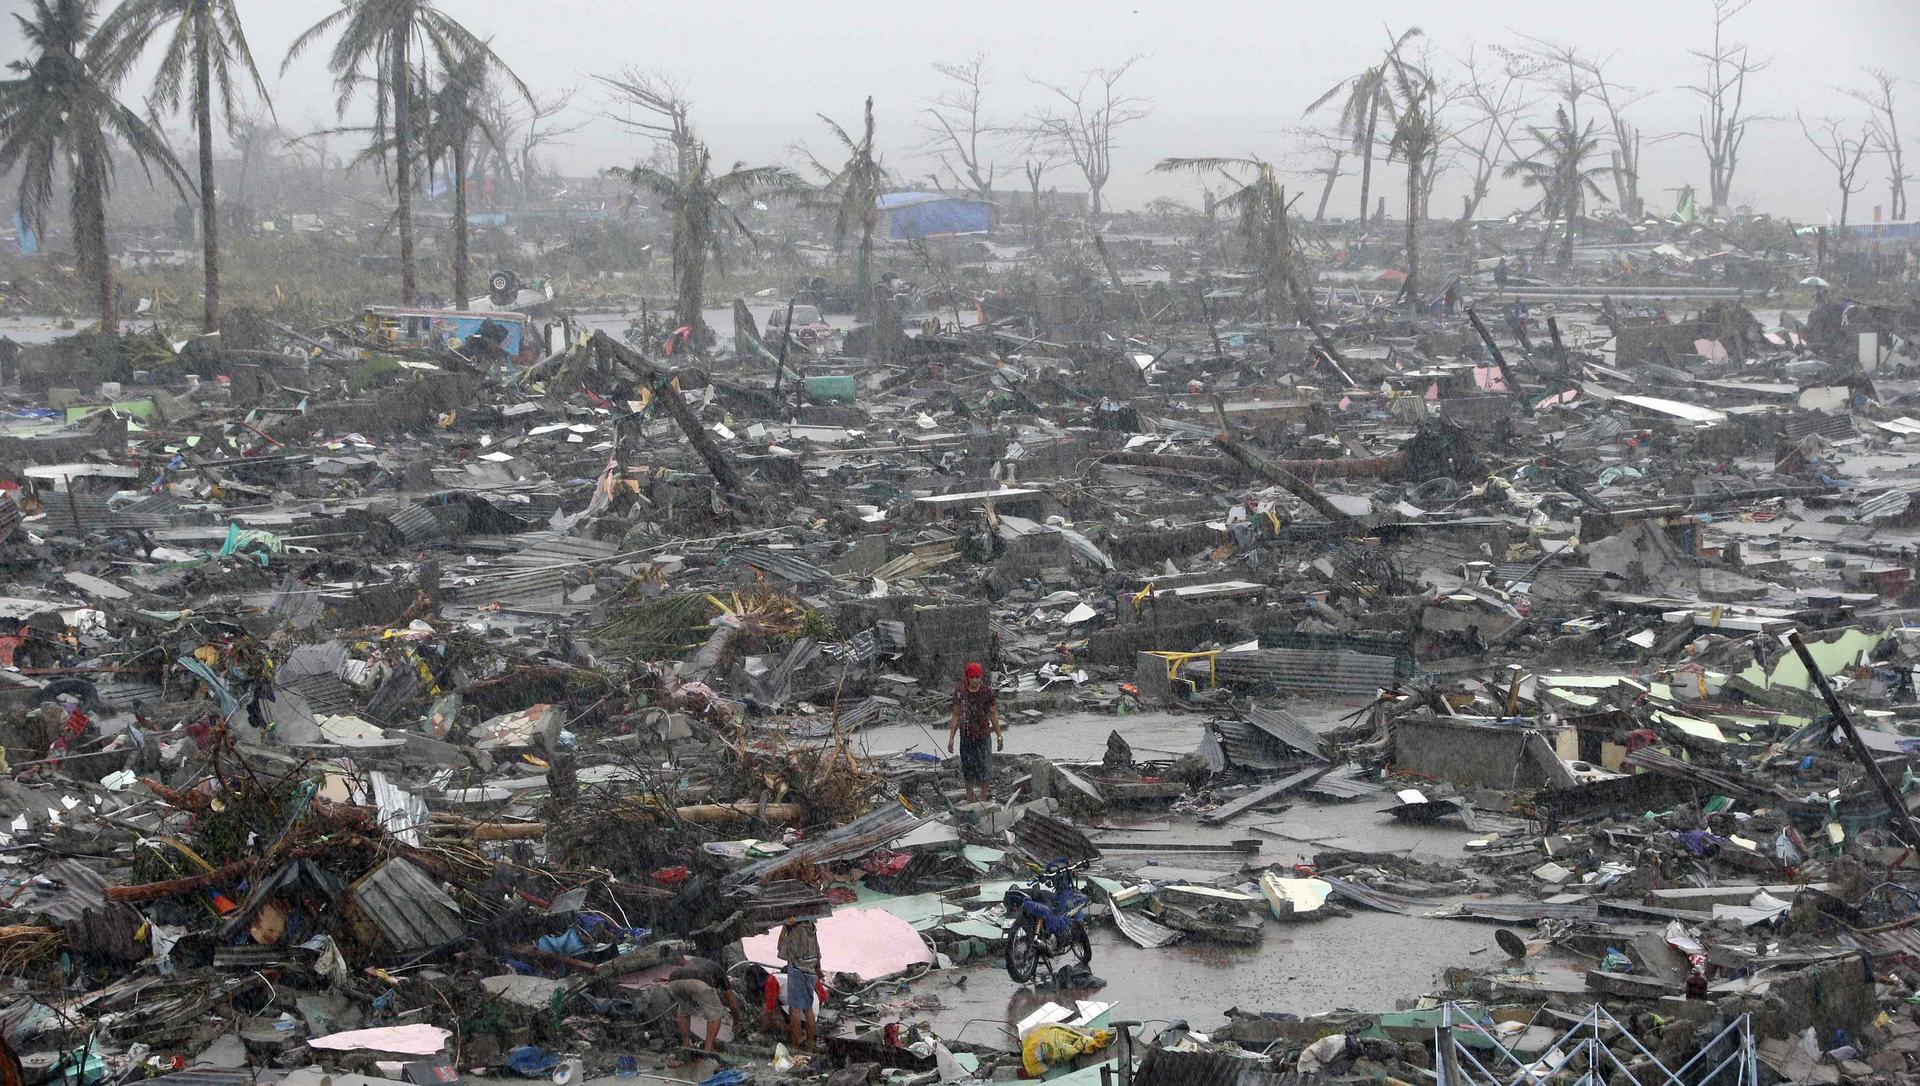 Devastation left by Super Typhoon Haiyan in Tacloban, with survivors stranded in the mud and rain amid debris from their homes against a bleak backdrop of wind-battered palm trees. Photo: Reuters